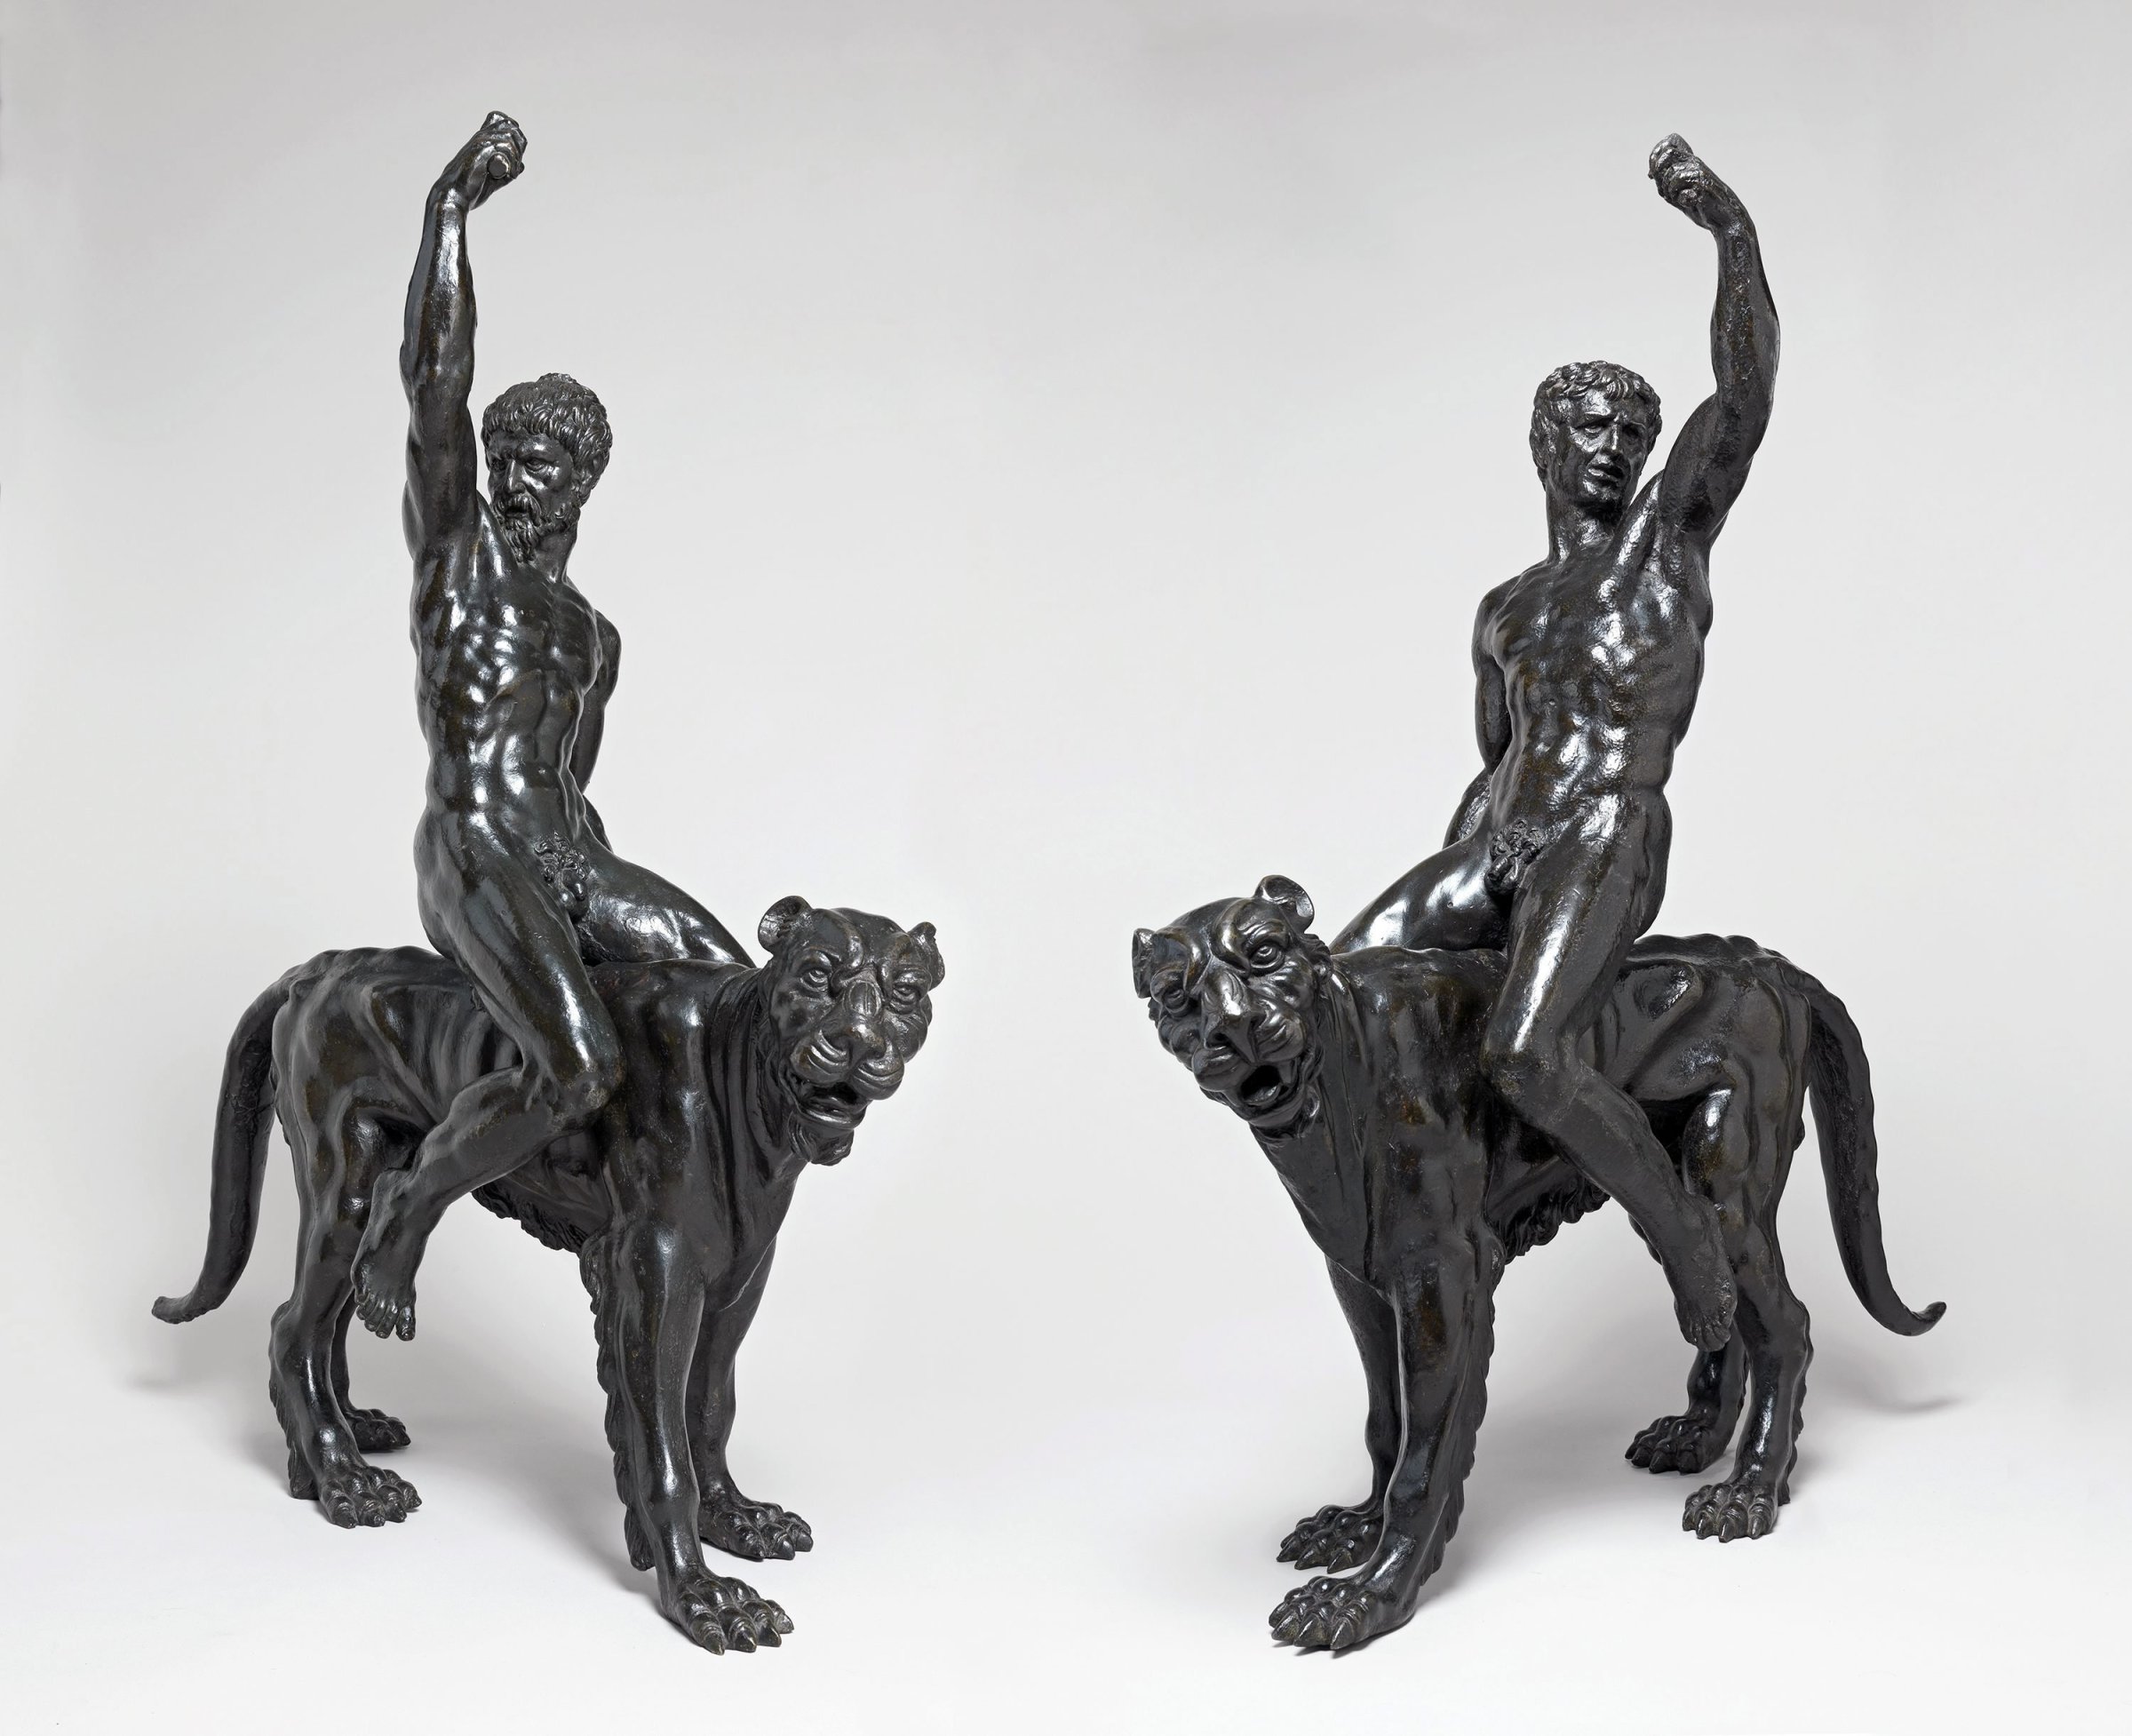 Michelangelo Bronzes discovered by Fitzwilliam Museum and University of Cambridge